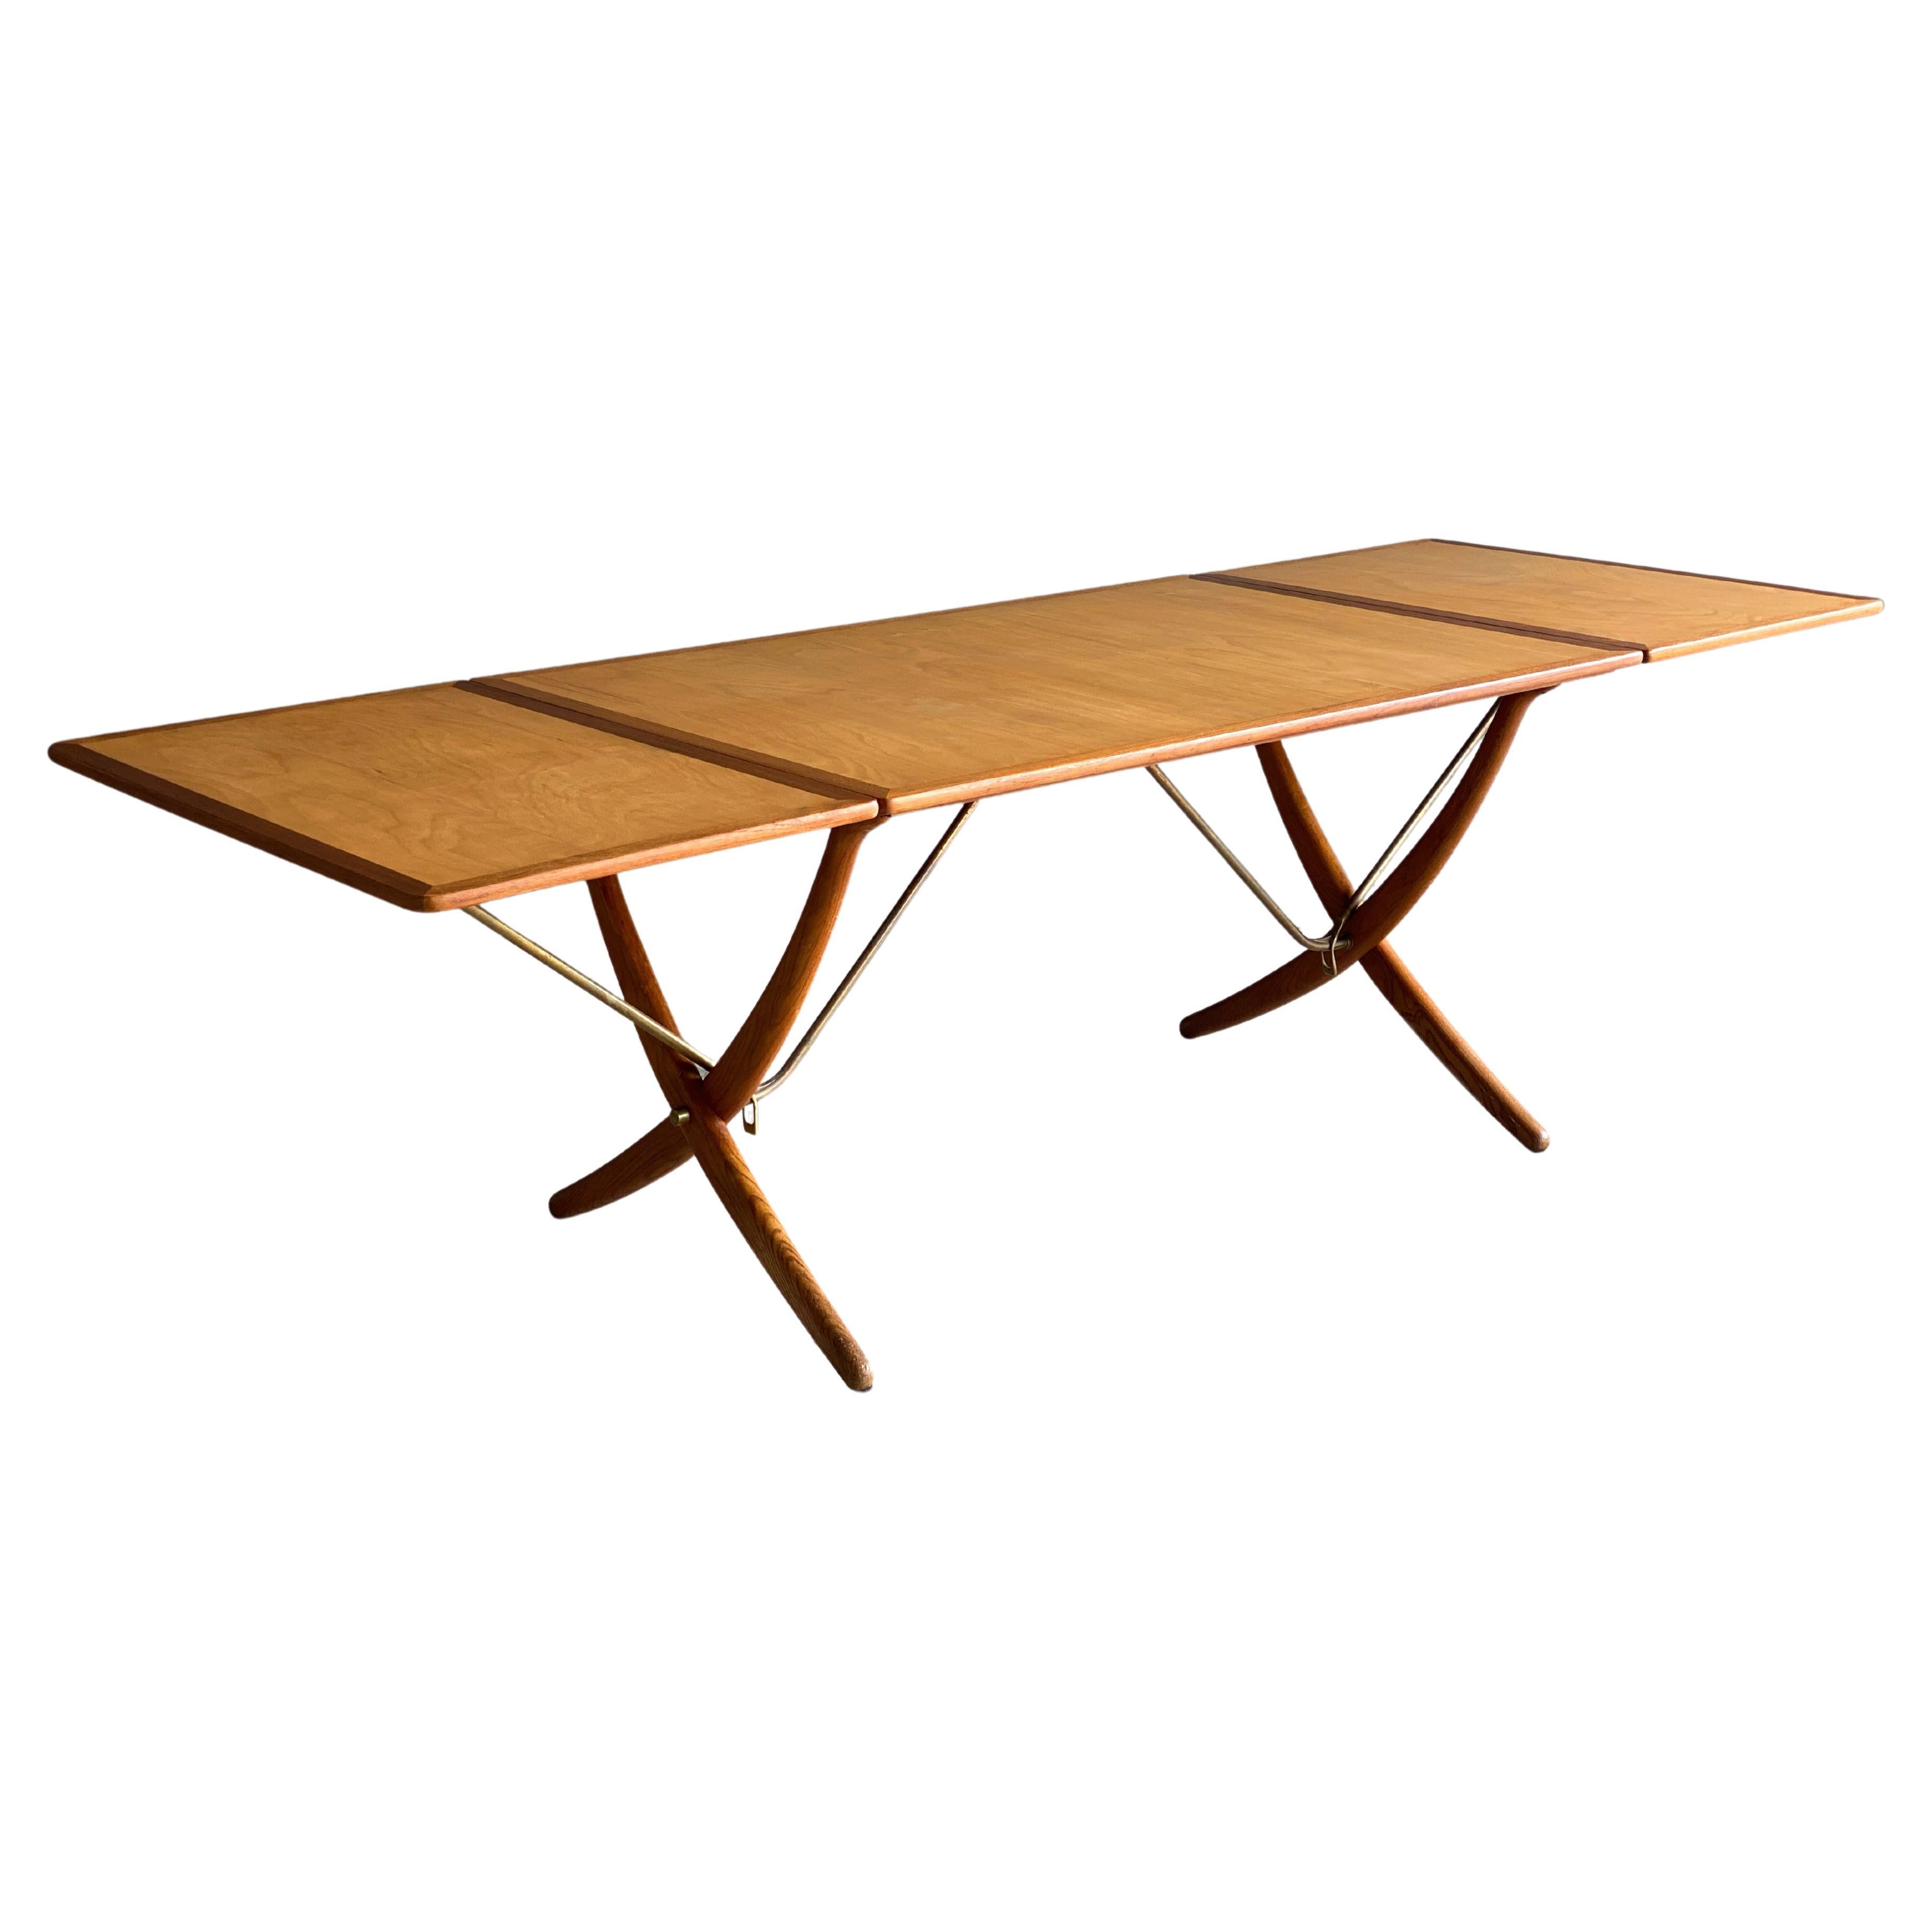 Early and Uncommon Variation Hans J. Wegner AT-304 Dining Table